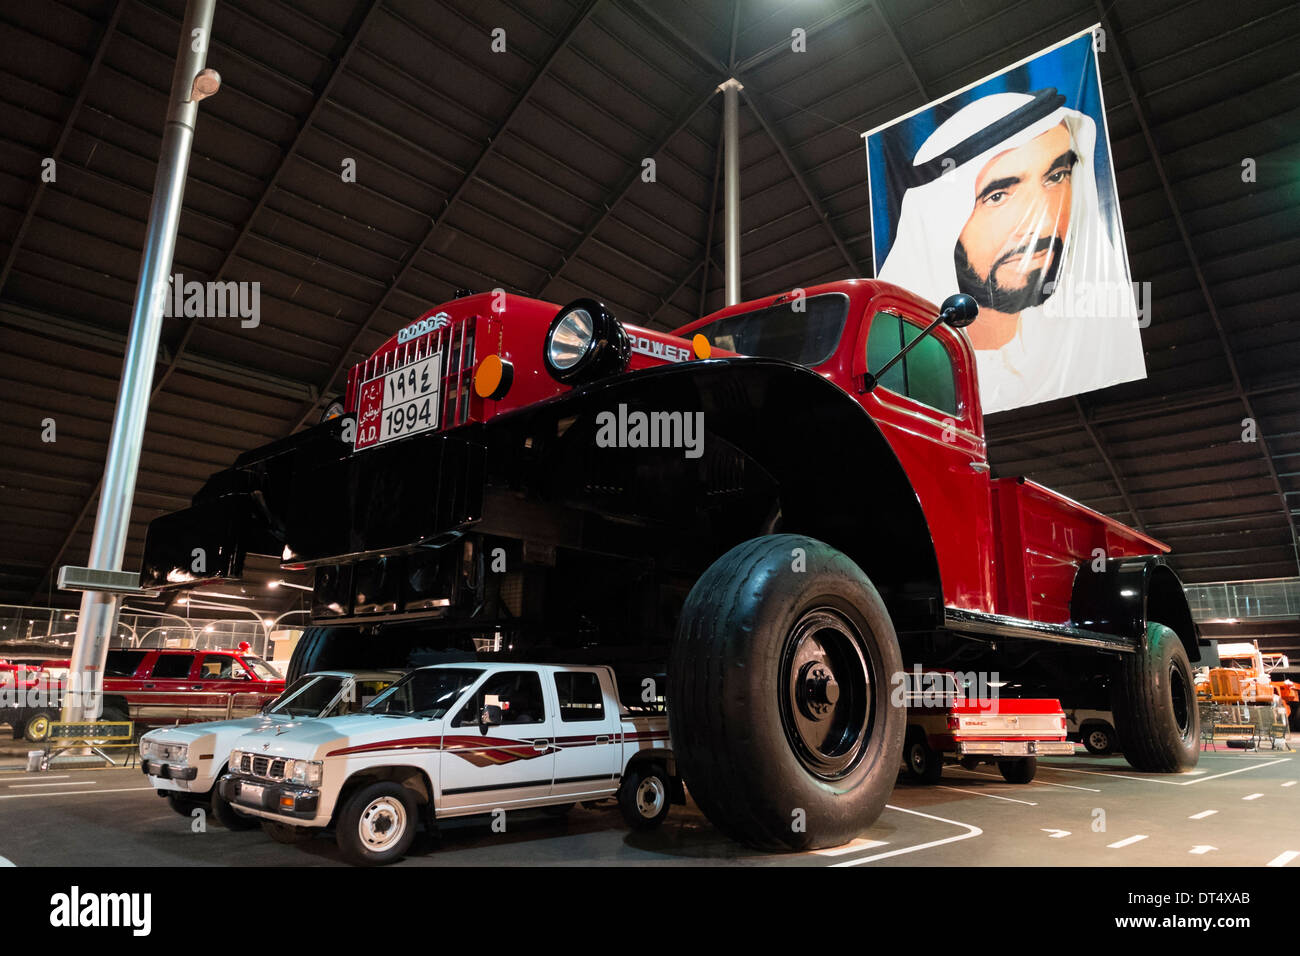 Very large Dodge truck on display at Emirates National Auto Museum ouside Abu Dhabi in United Arab Emirates Stock Photo